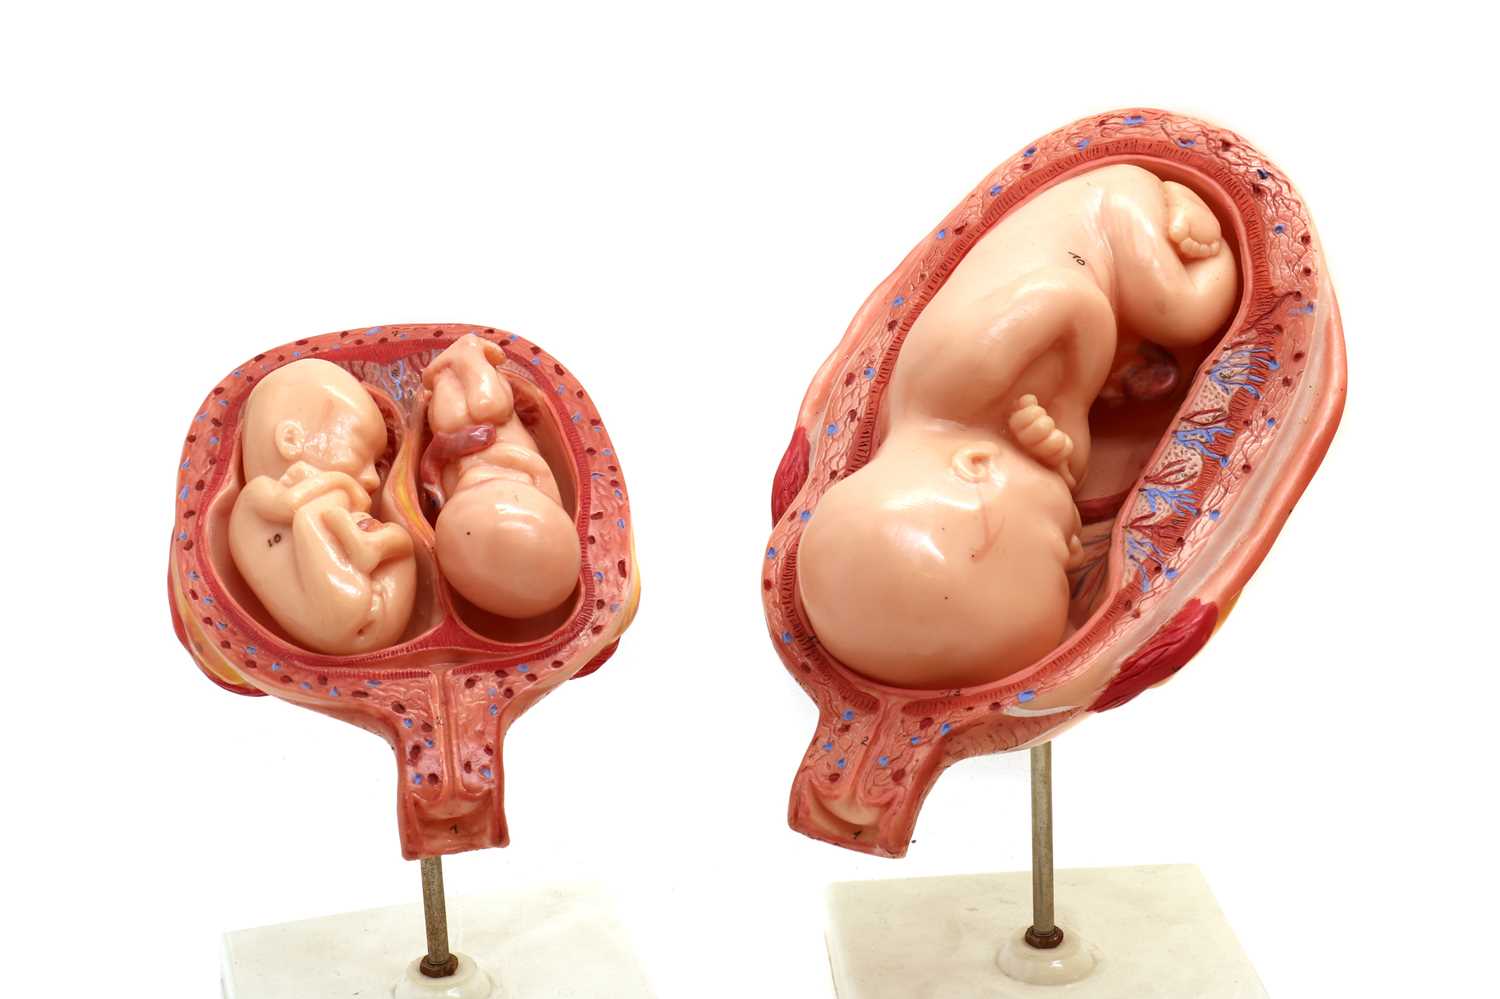 A West German plastic scientific model of a baby in a womb, - Image 6 of 6